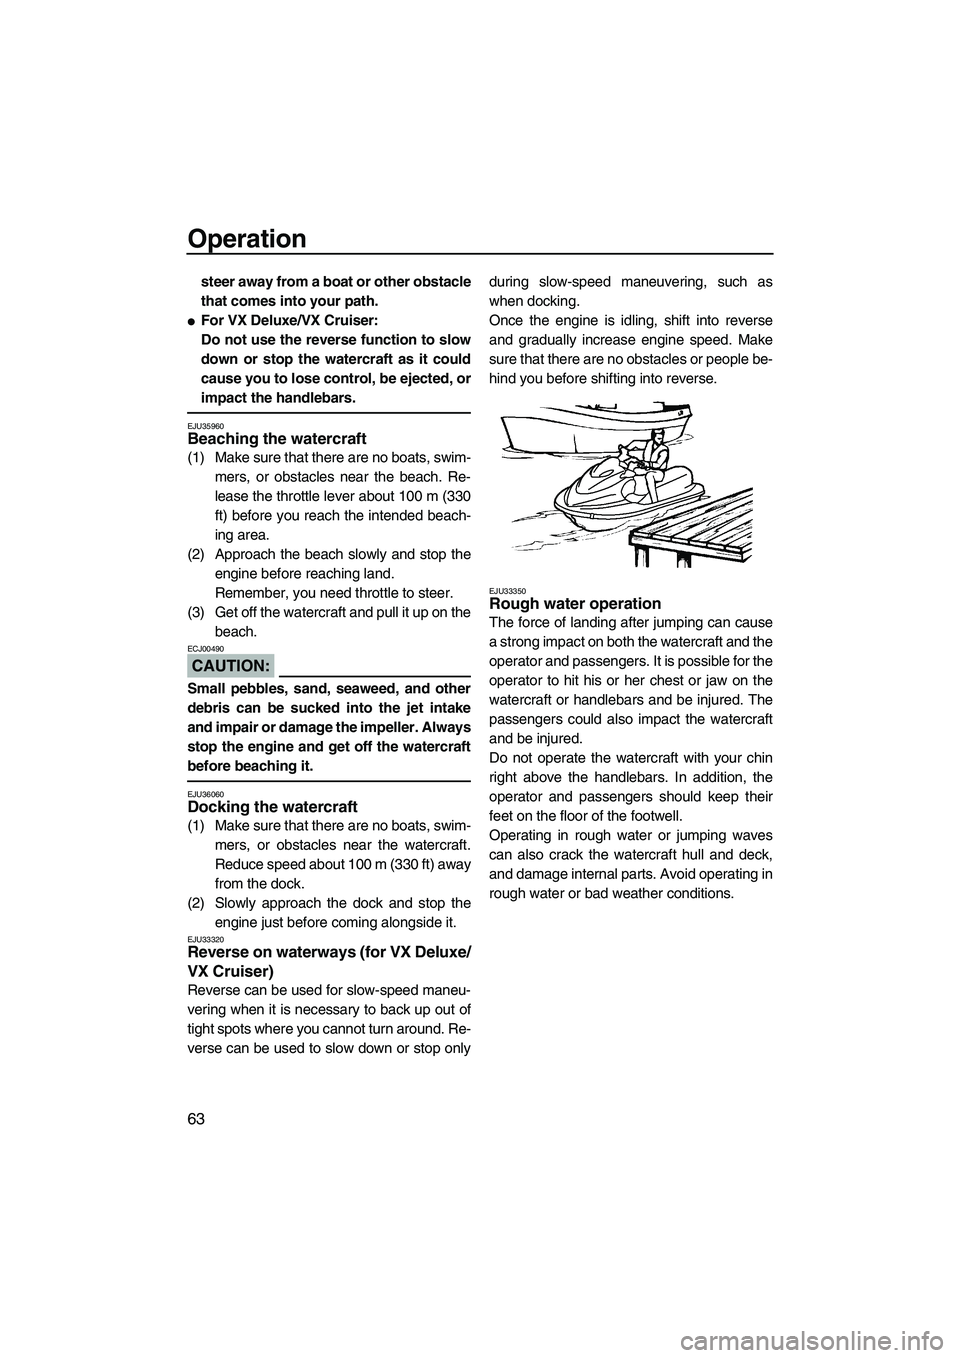 YAMAHA VX SPORT 2007  Owners Manual Operation
63
steer away from a boat or other obstacle
that comes into your path.
For VX Deluxe/VX Cruiser:
Do not use the reverse function to slow
down or stop the watercraft as it could
cause you to